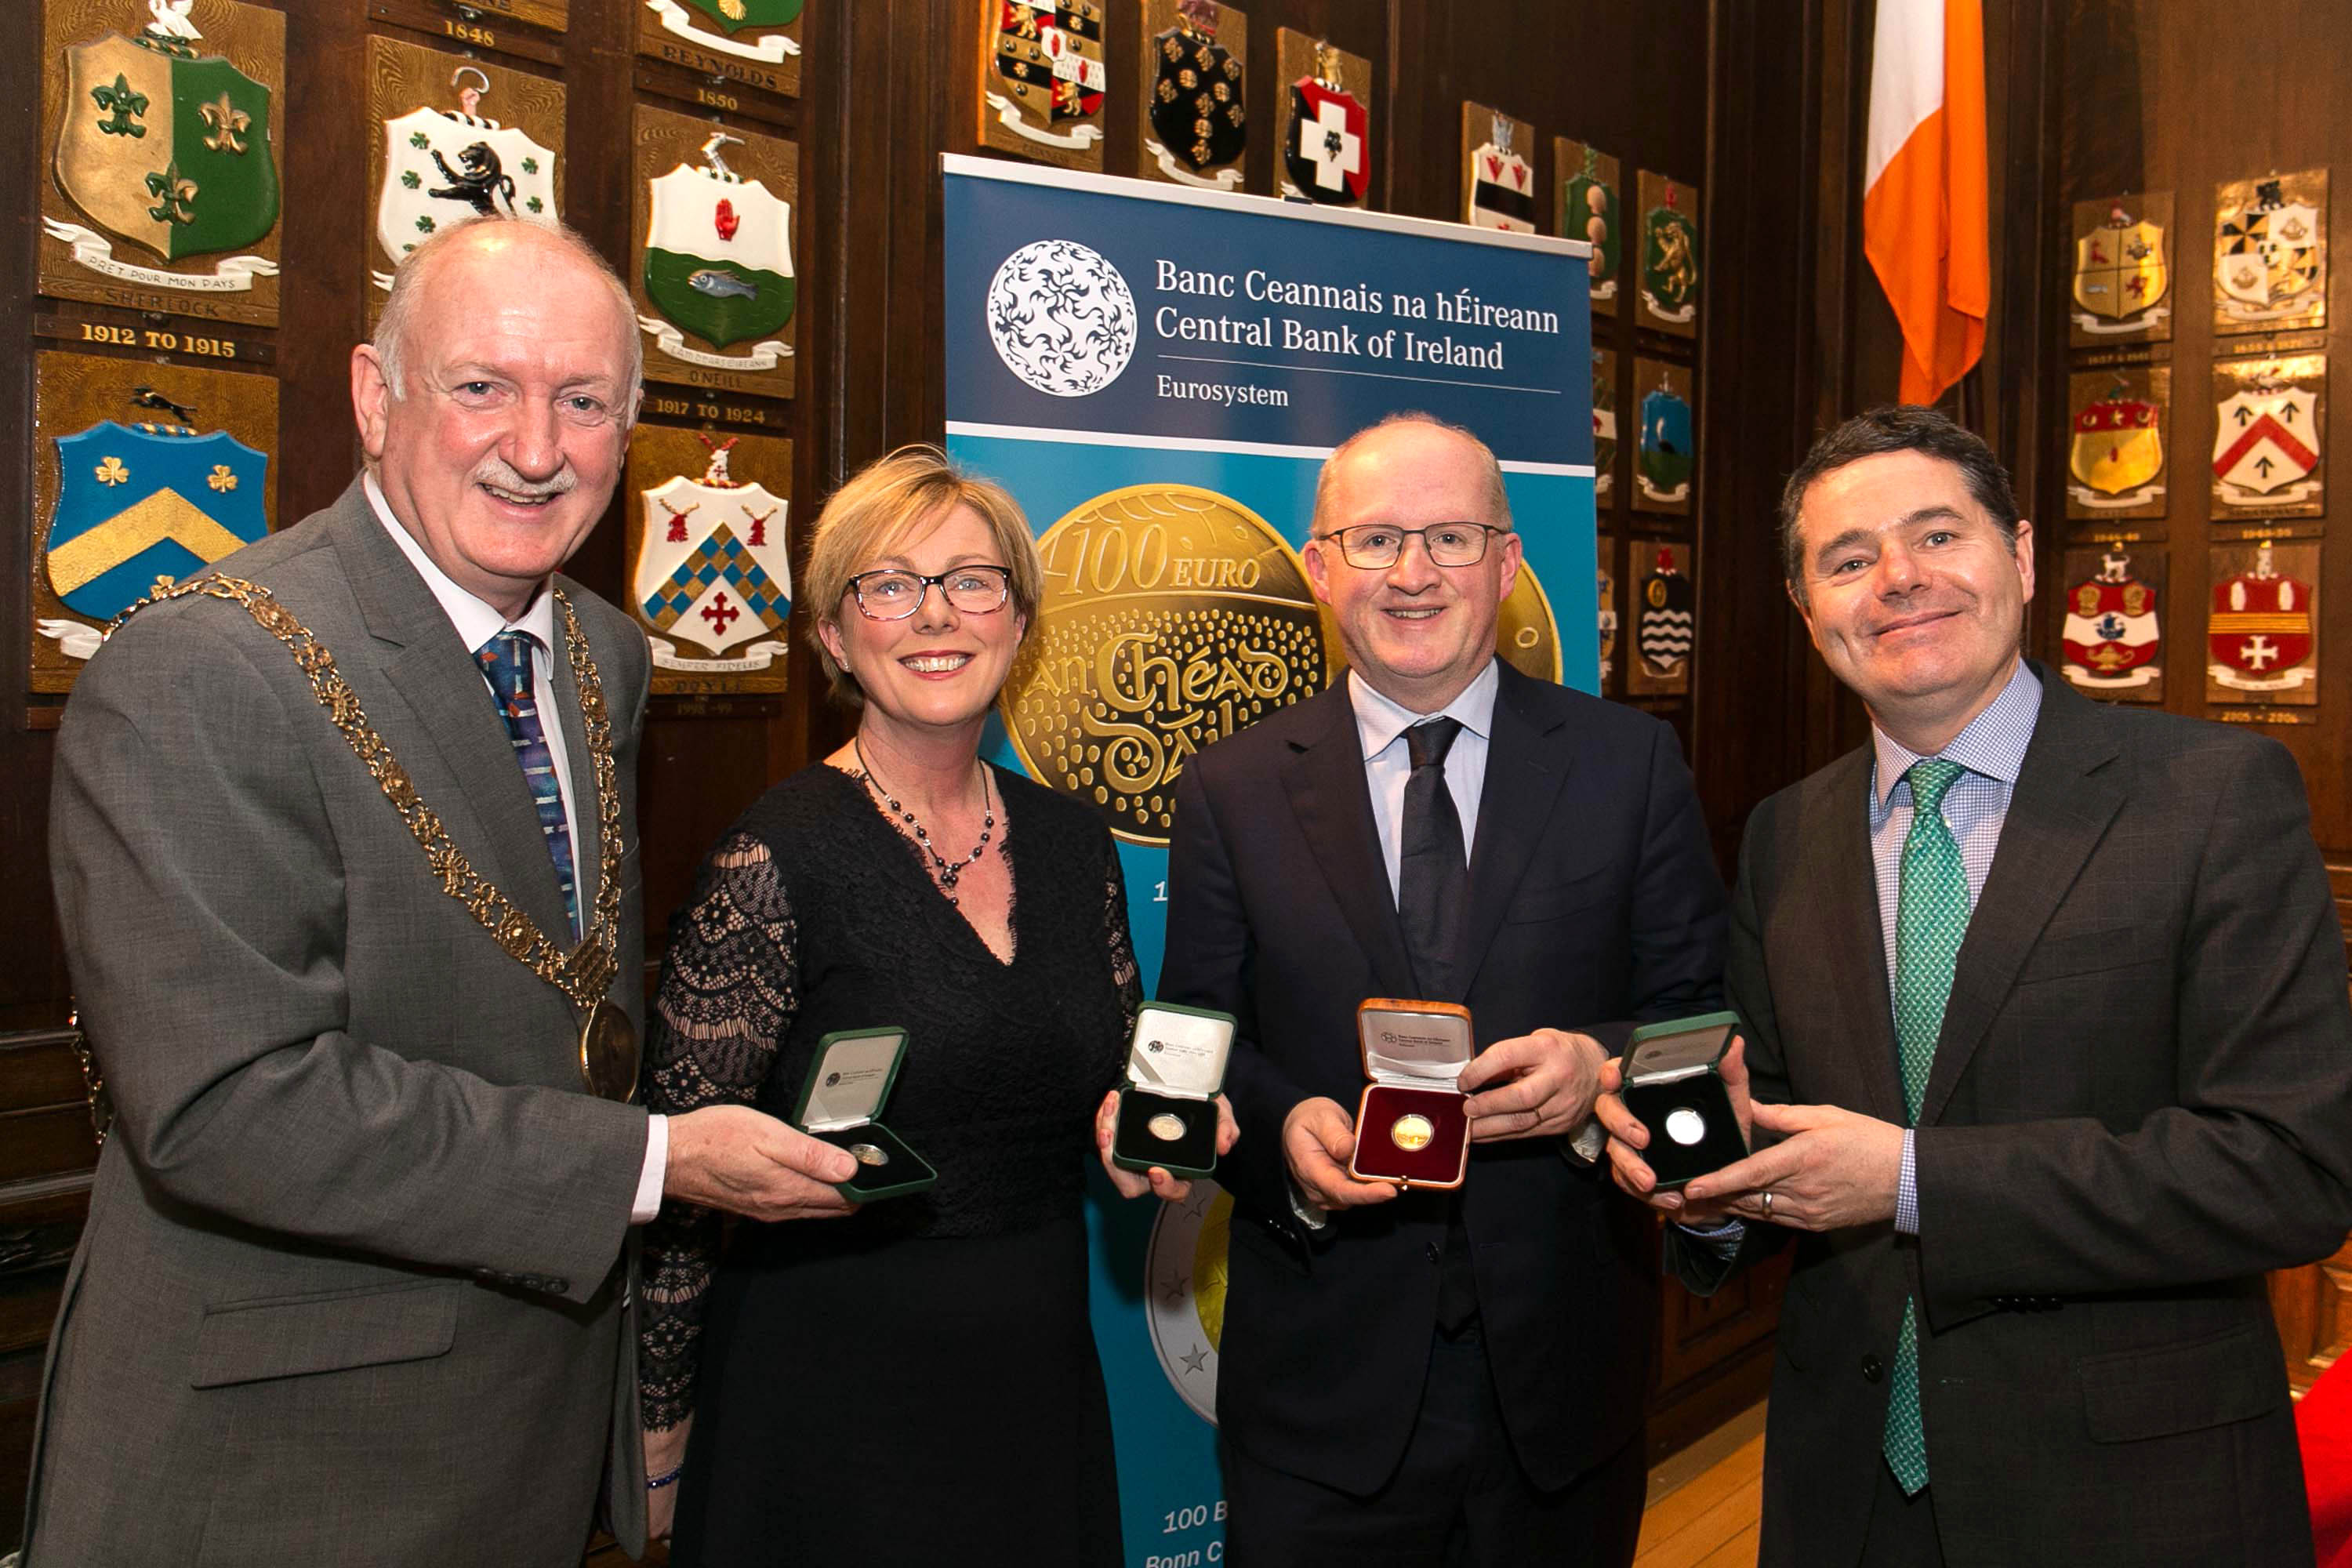 €2 coin commemorating the centenary of the meeting of the First Dáil launched at Mansion House